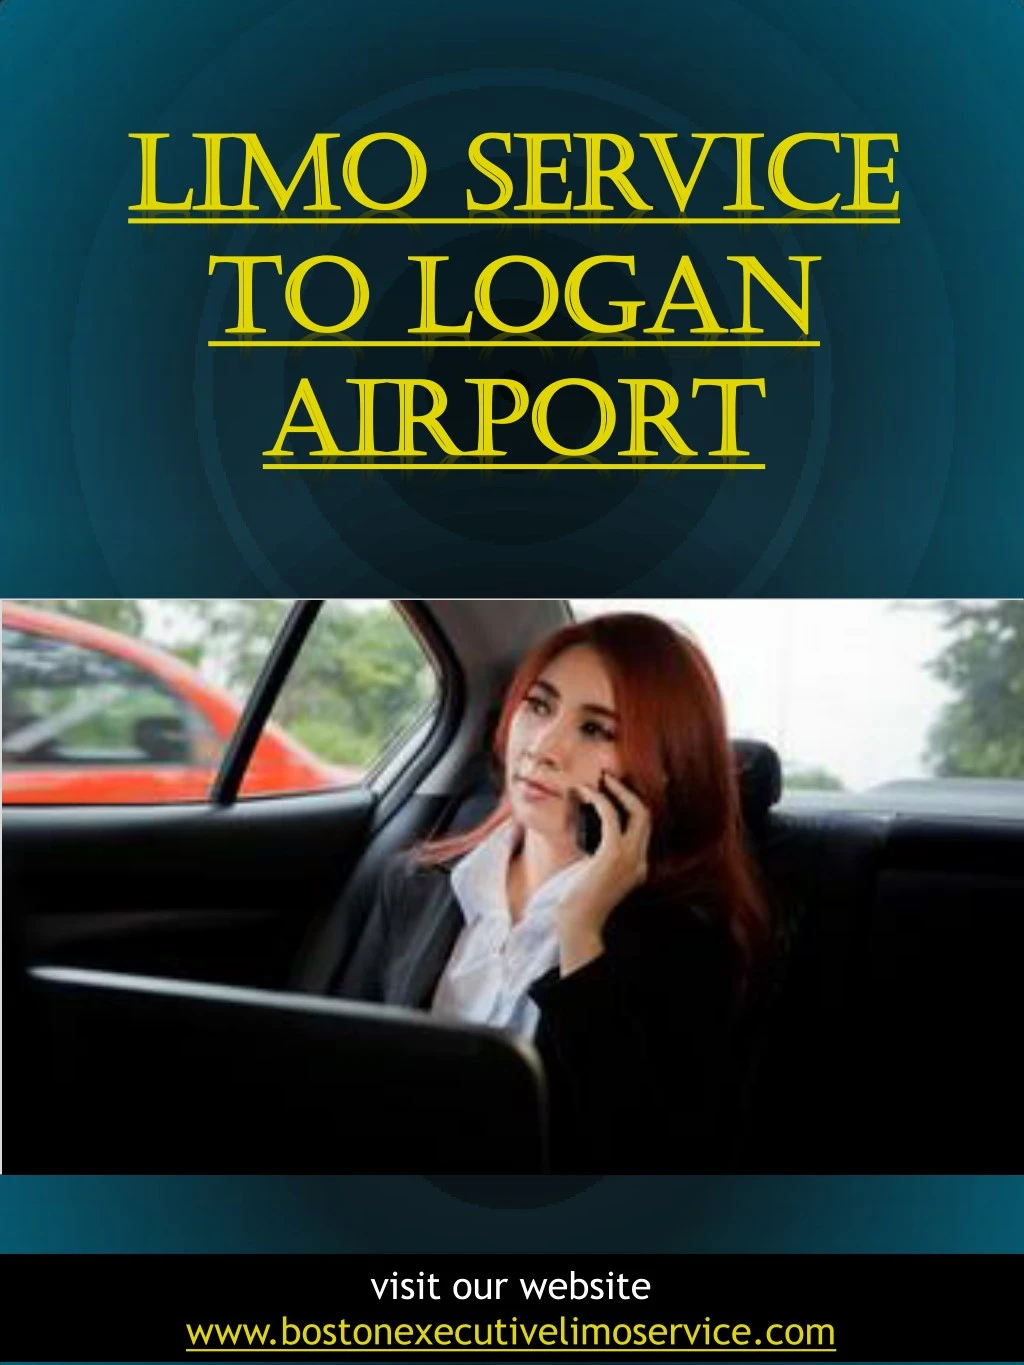 limo service limo service to logan to logan